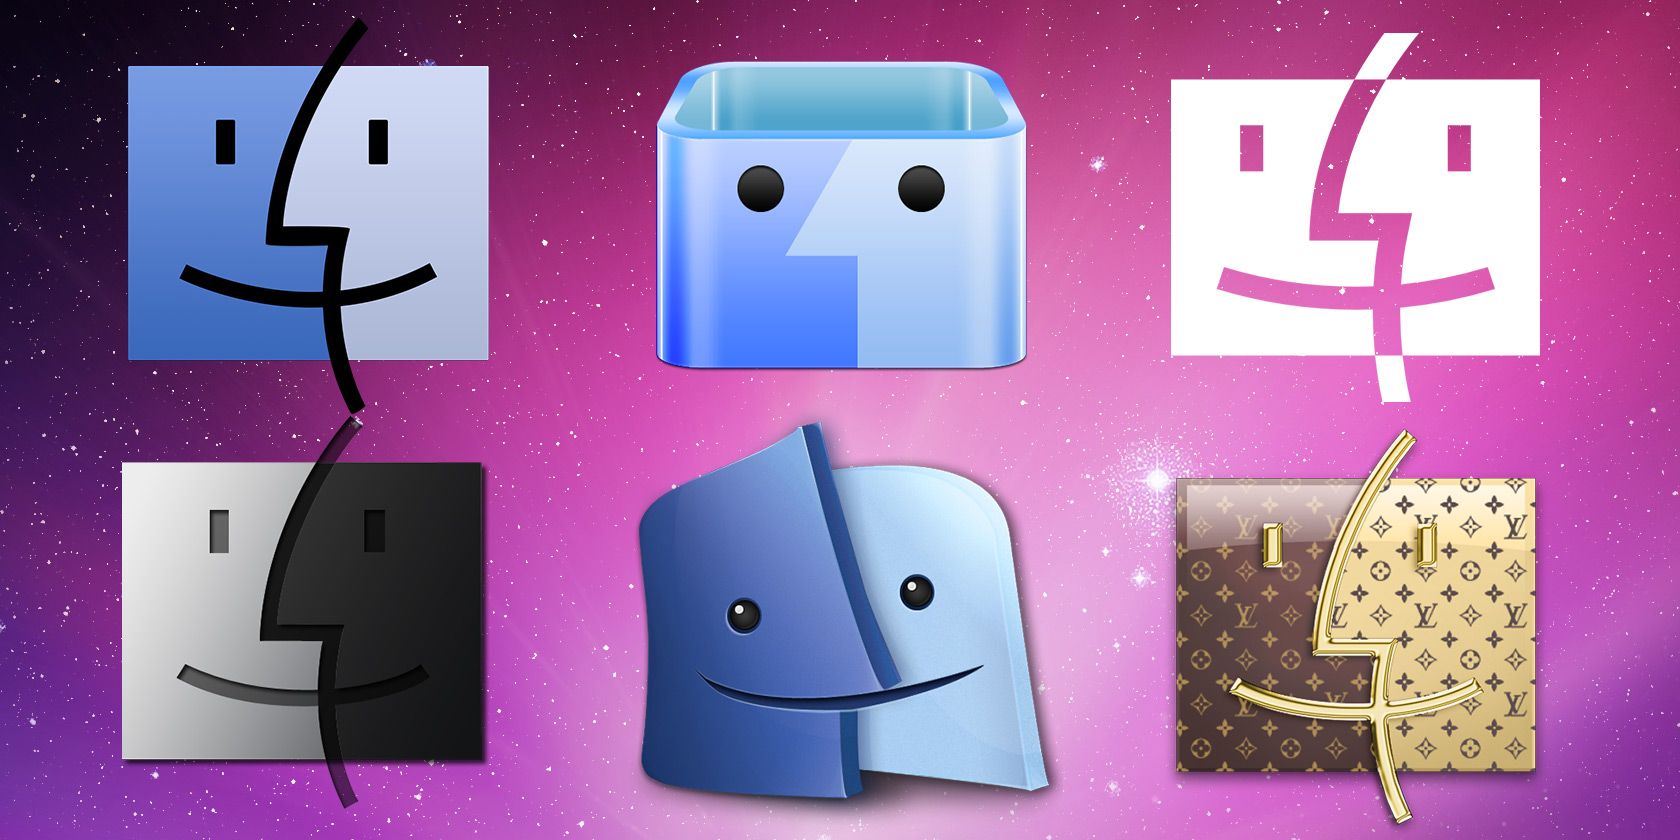 Download Icons For Mac Os X